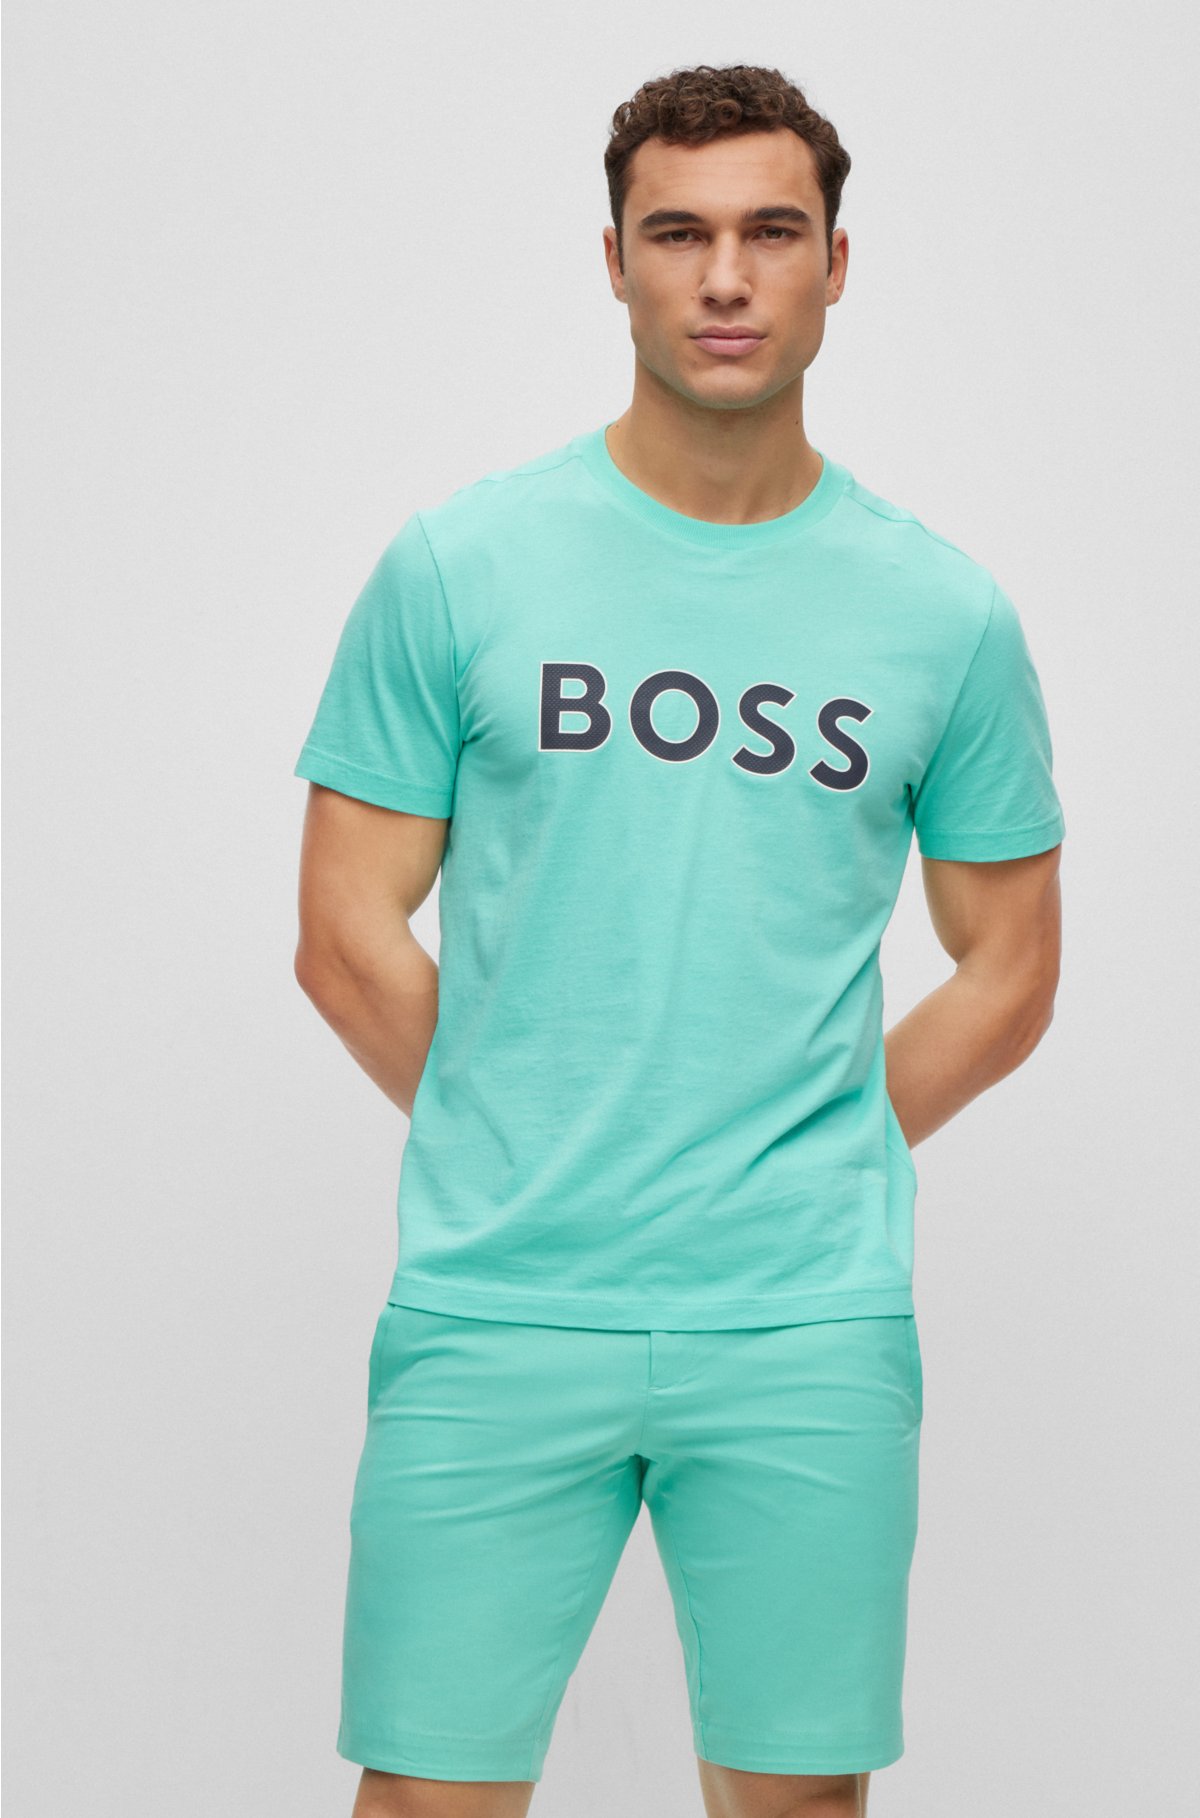 BOSS - Crew-neck with jersey T-shirt logo in print cotton